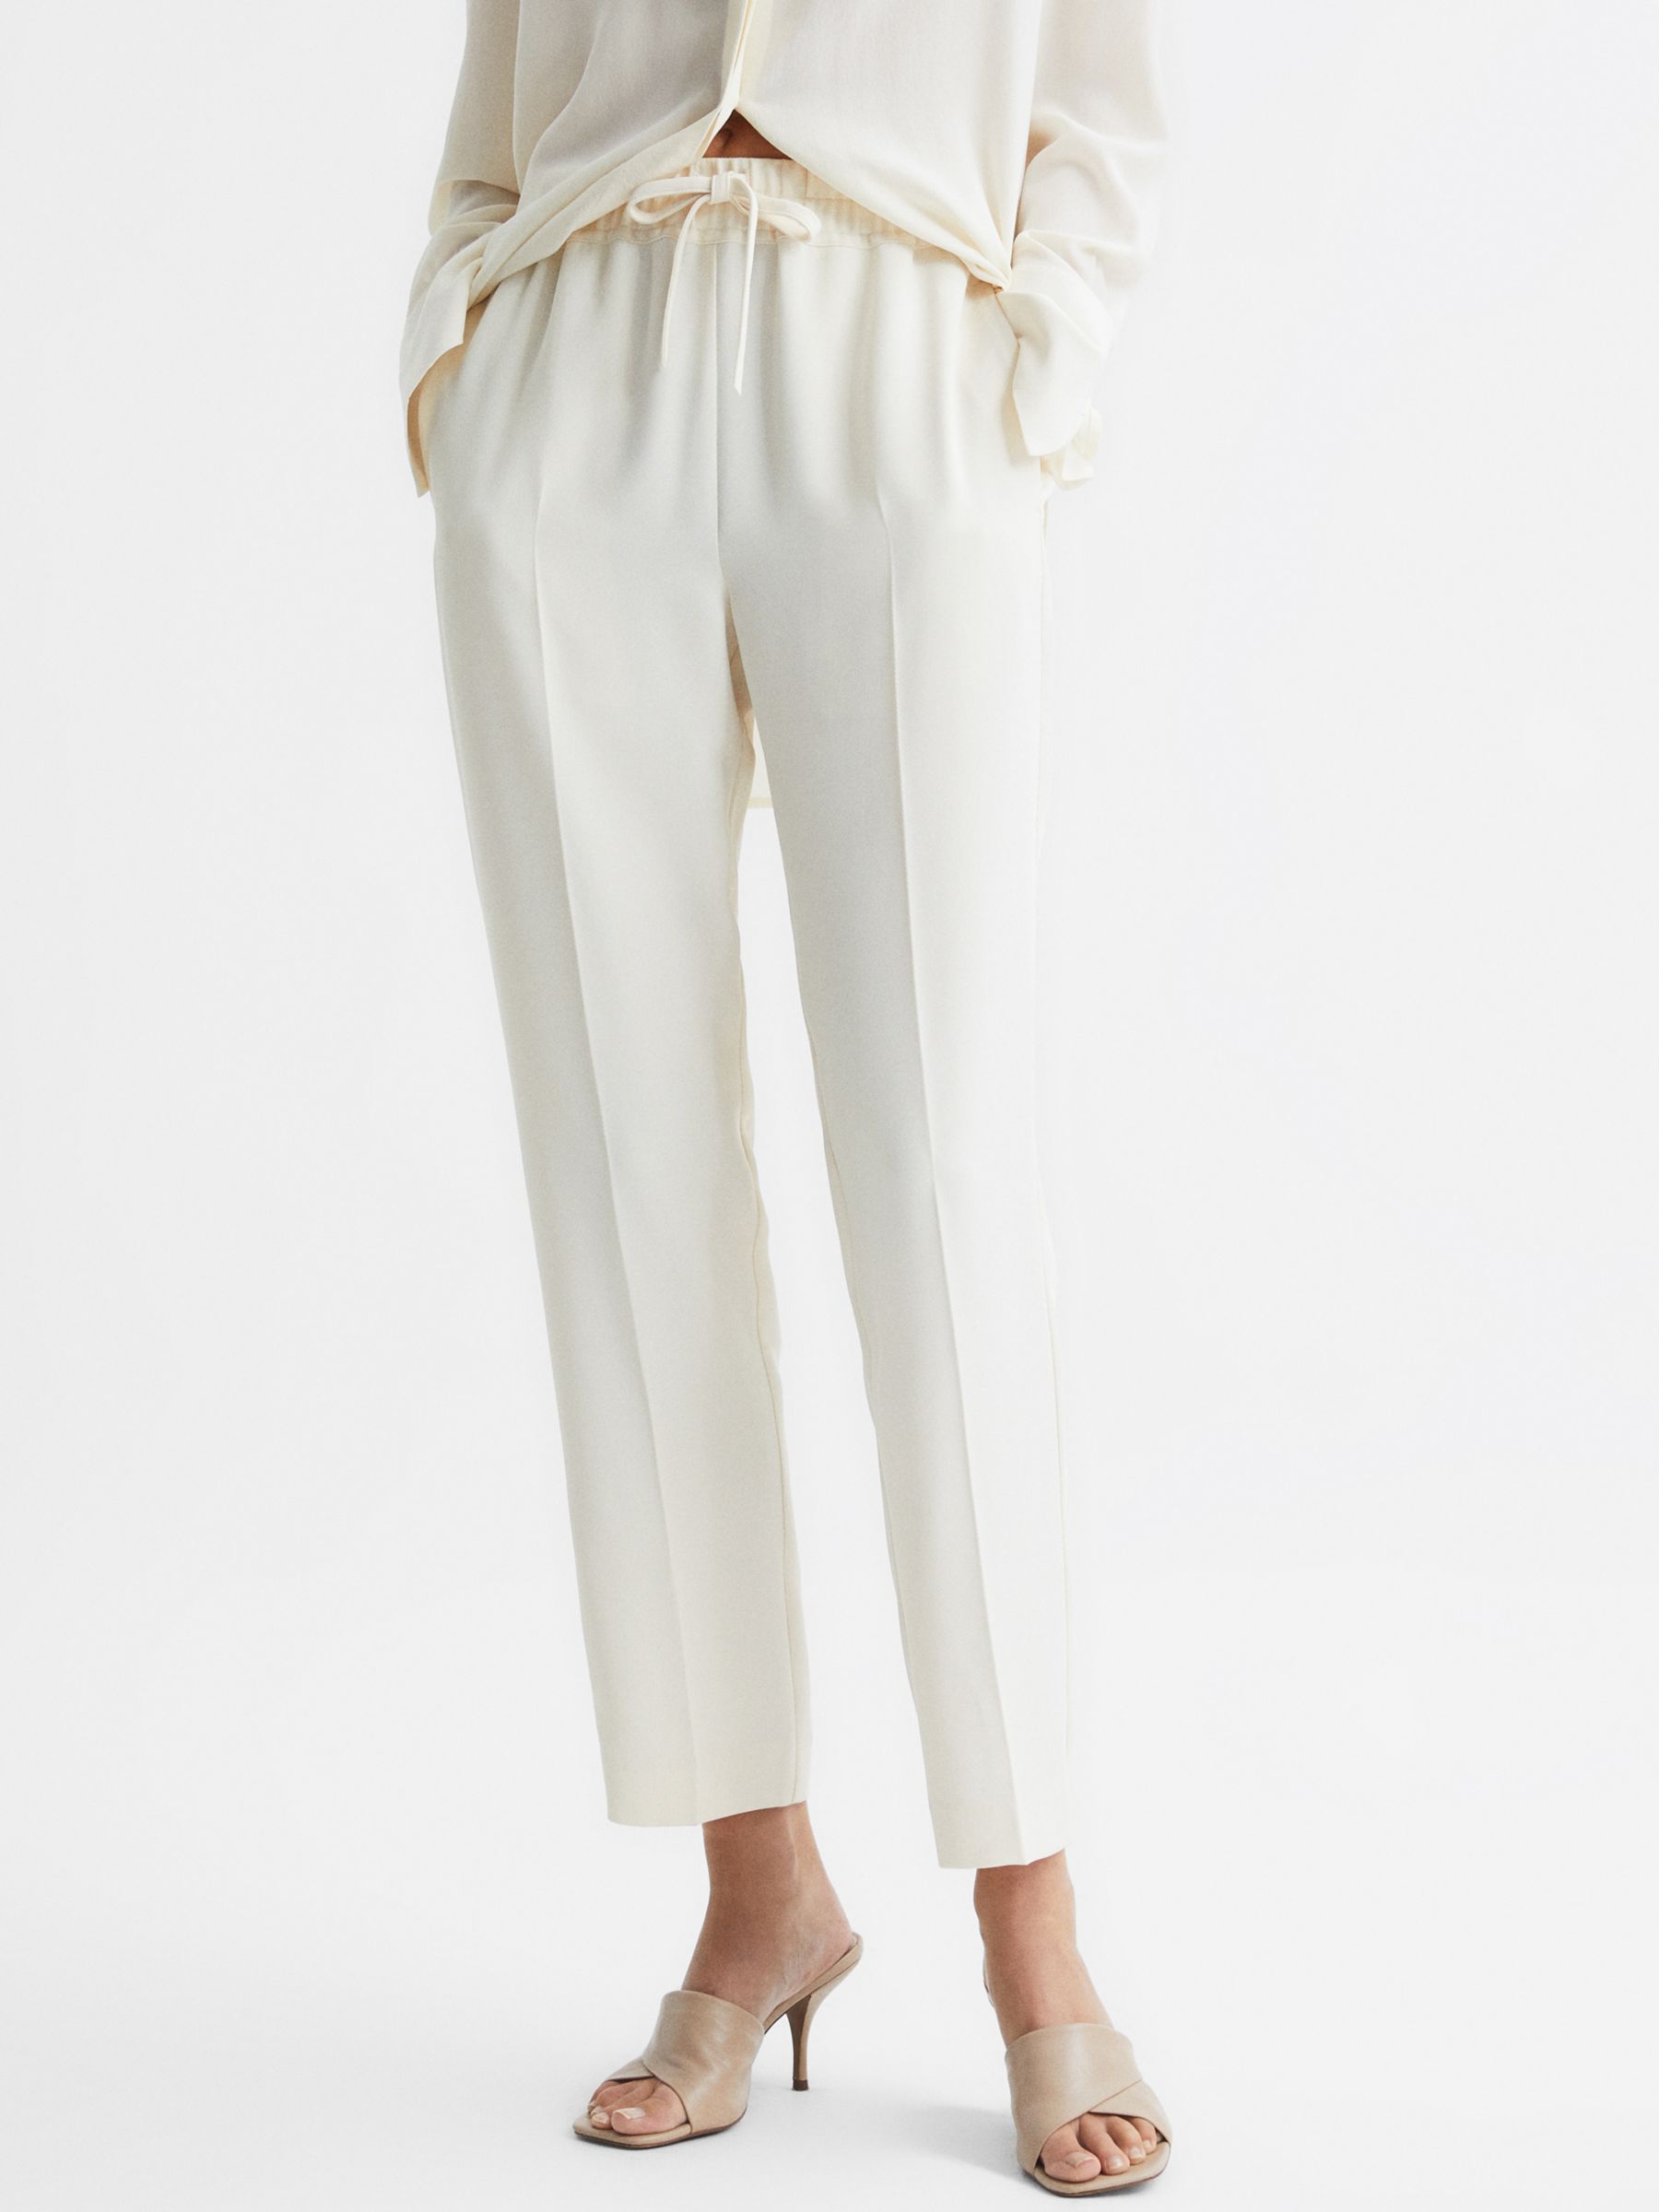 Reiss Hailey Pull On Trousers, Cream at John Lewis & Partners